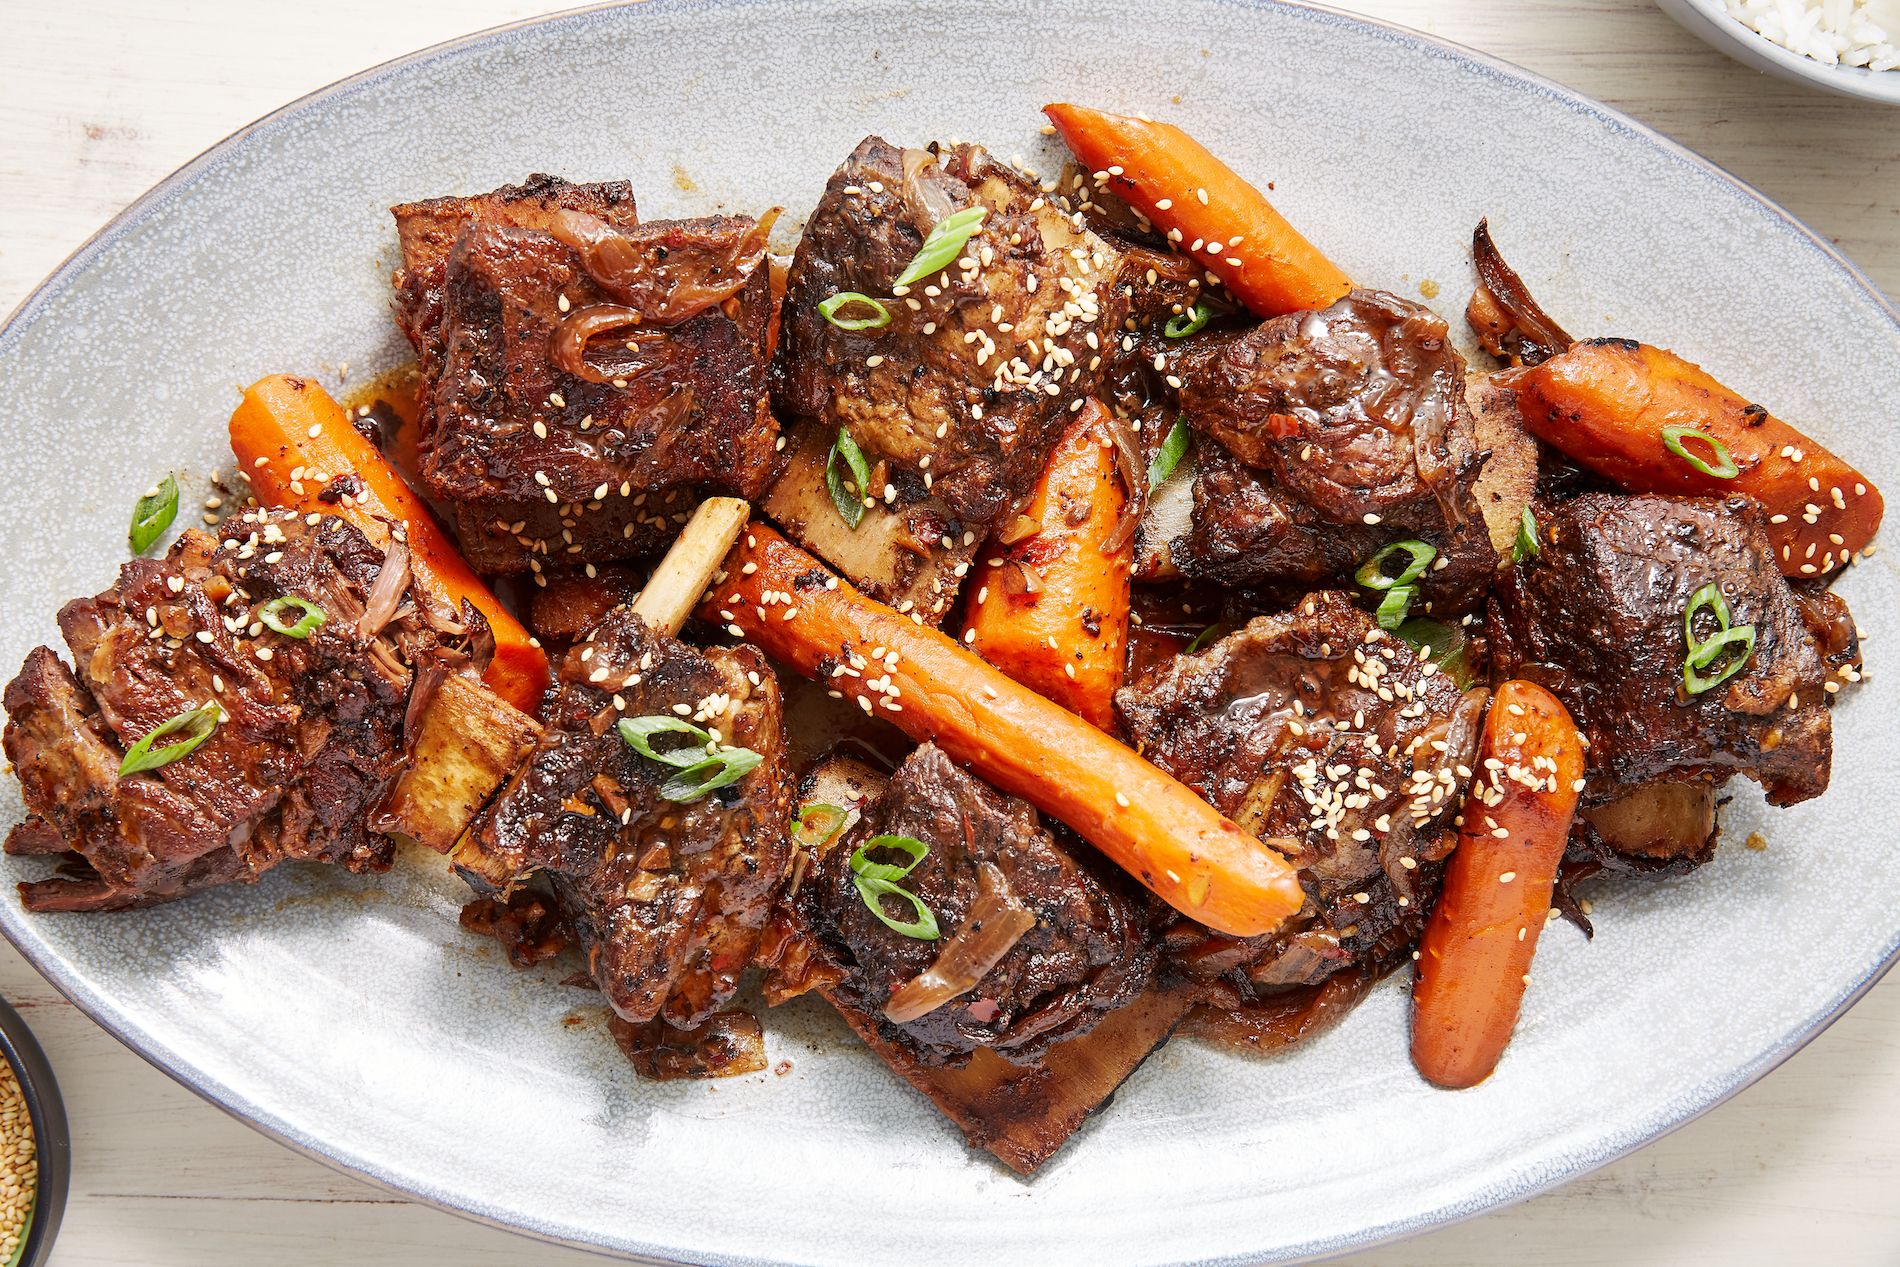 Best Slow Cooker Short Ribs - How to Make Slow Cooker Short Ribs